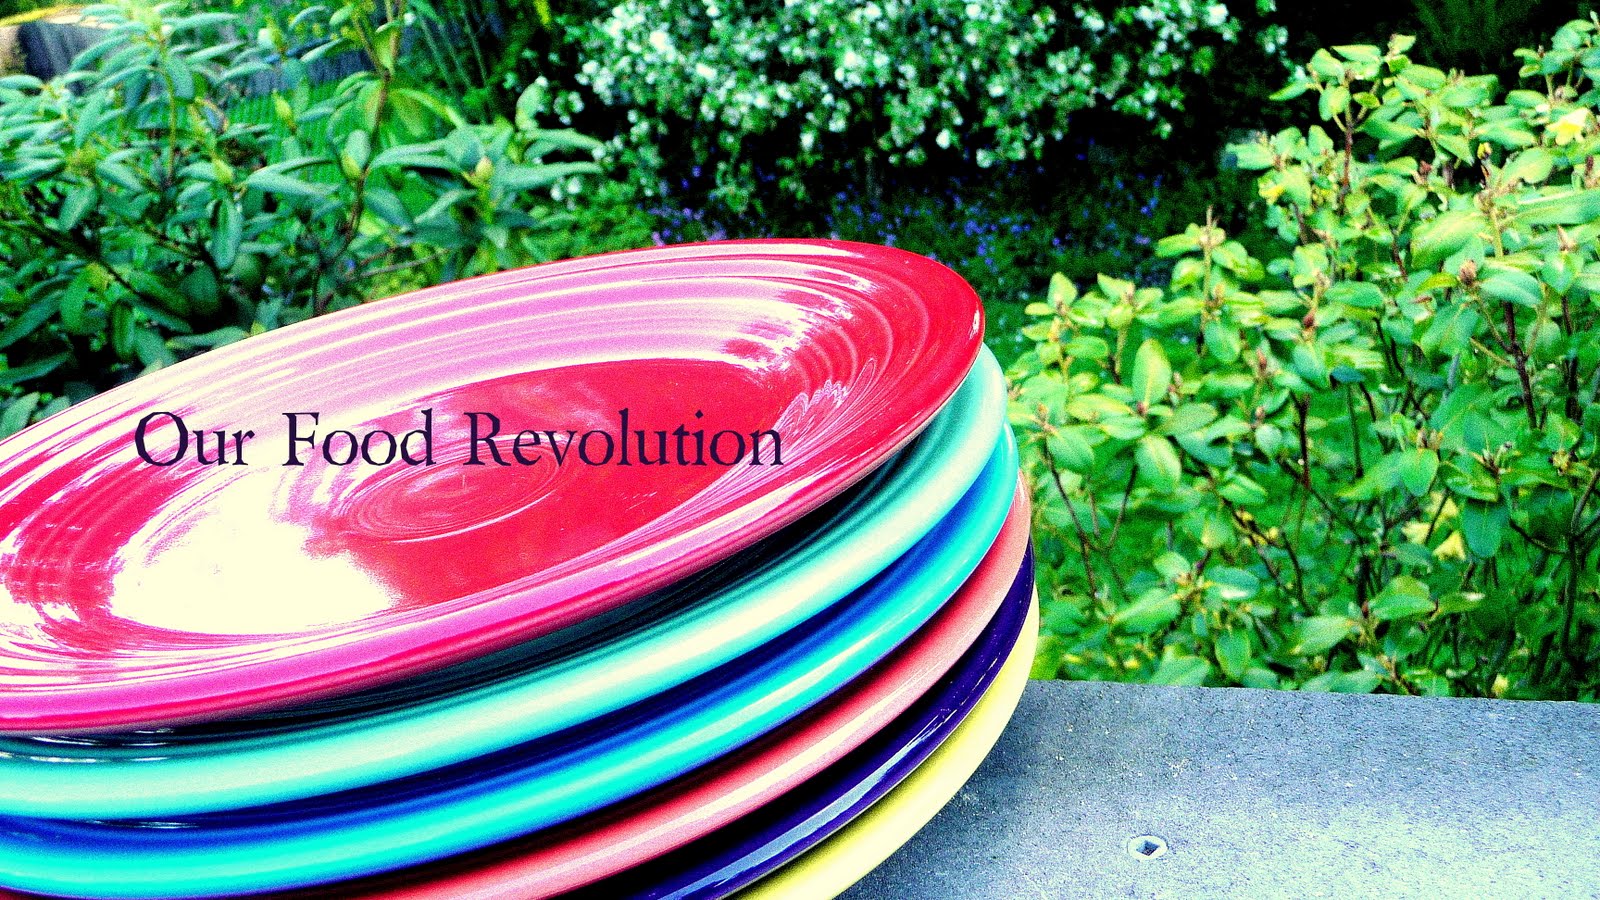 Our Food Revolution